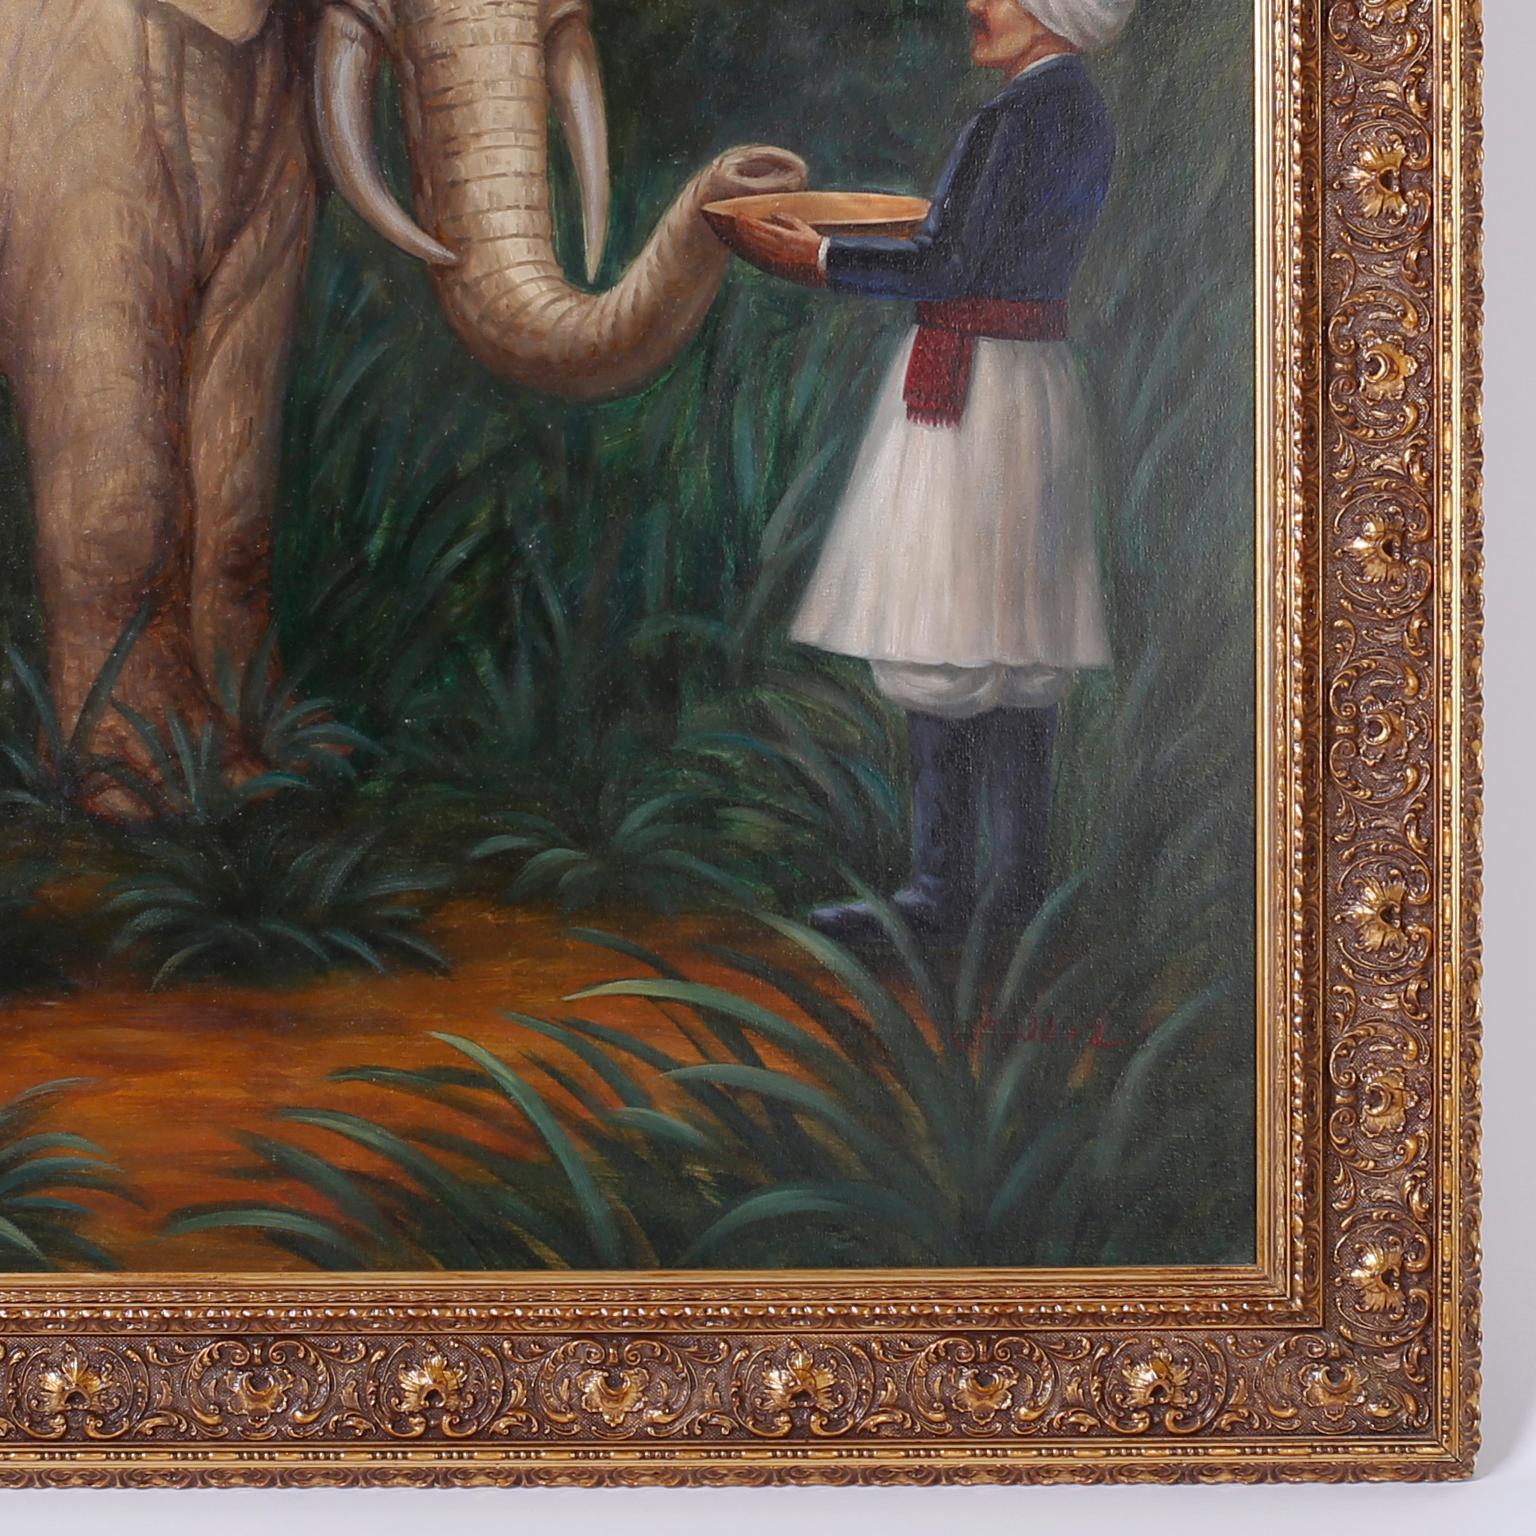 American Large Oil Painting on Canvas of an Elephant and a Man